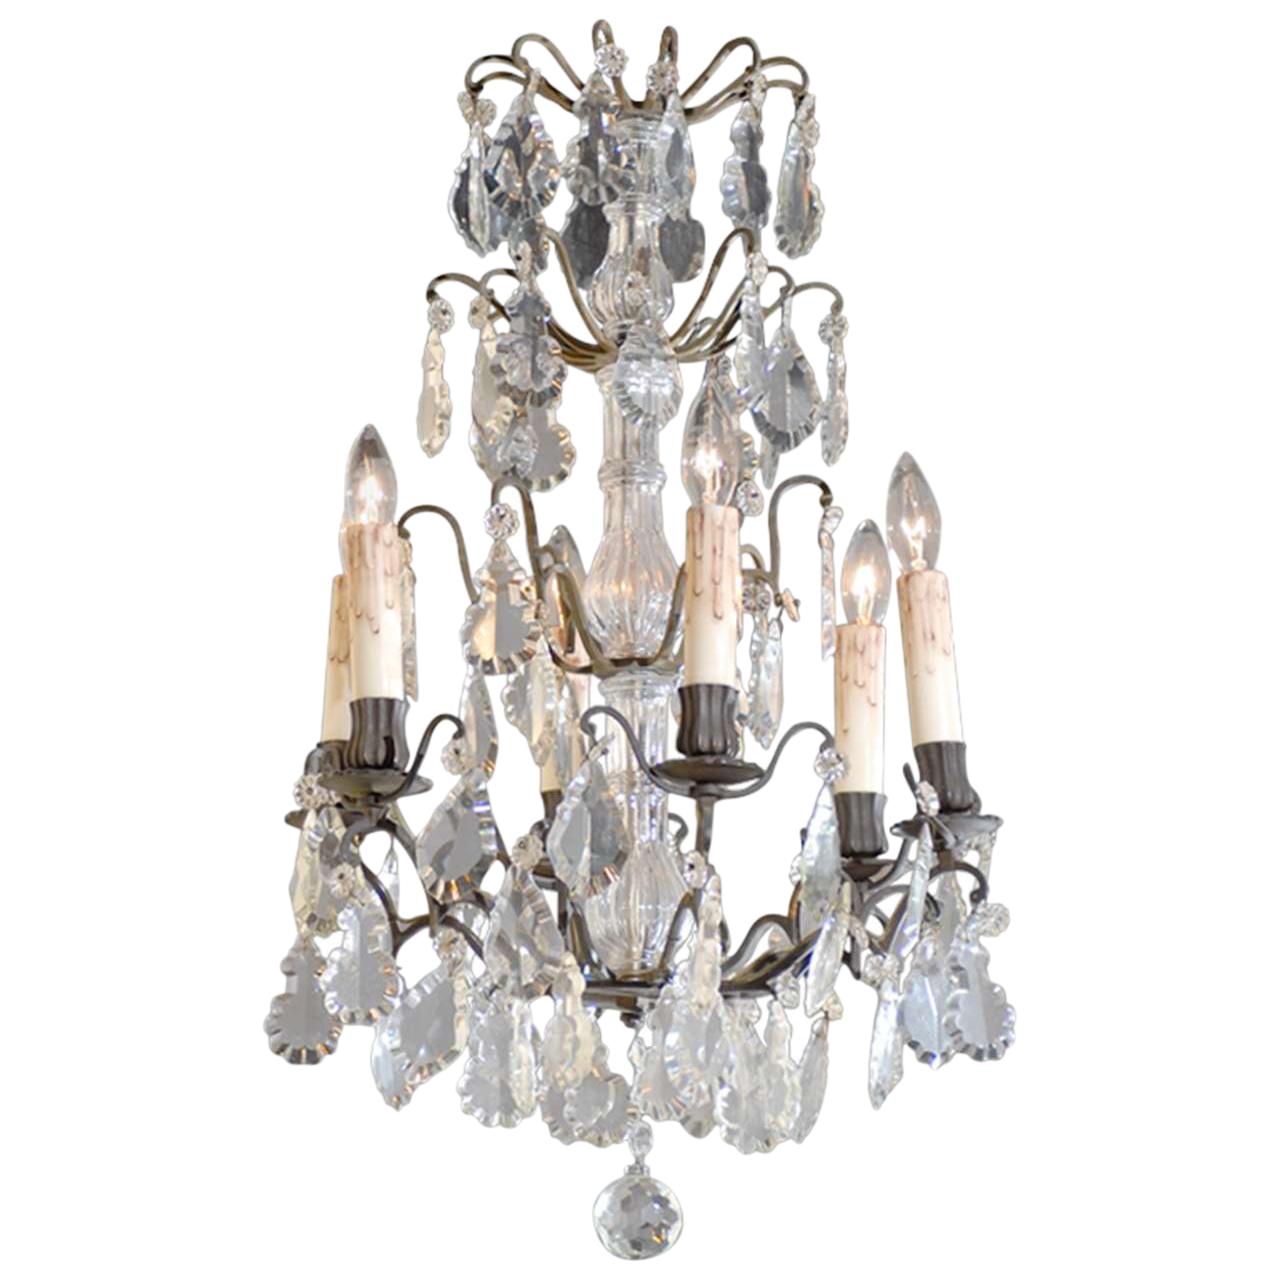 Antique French Iron & Crystal Chandelier